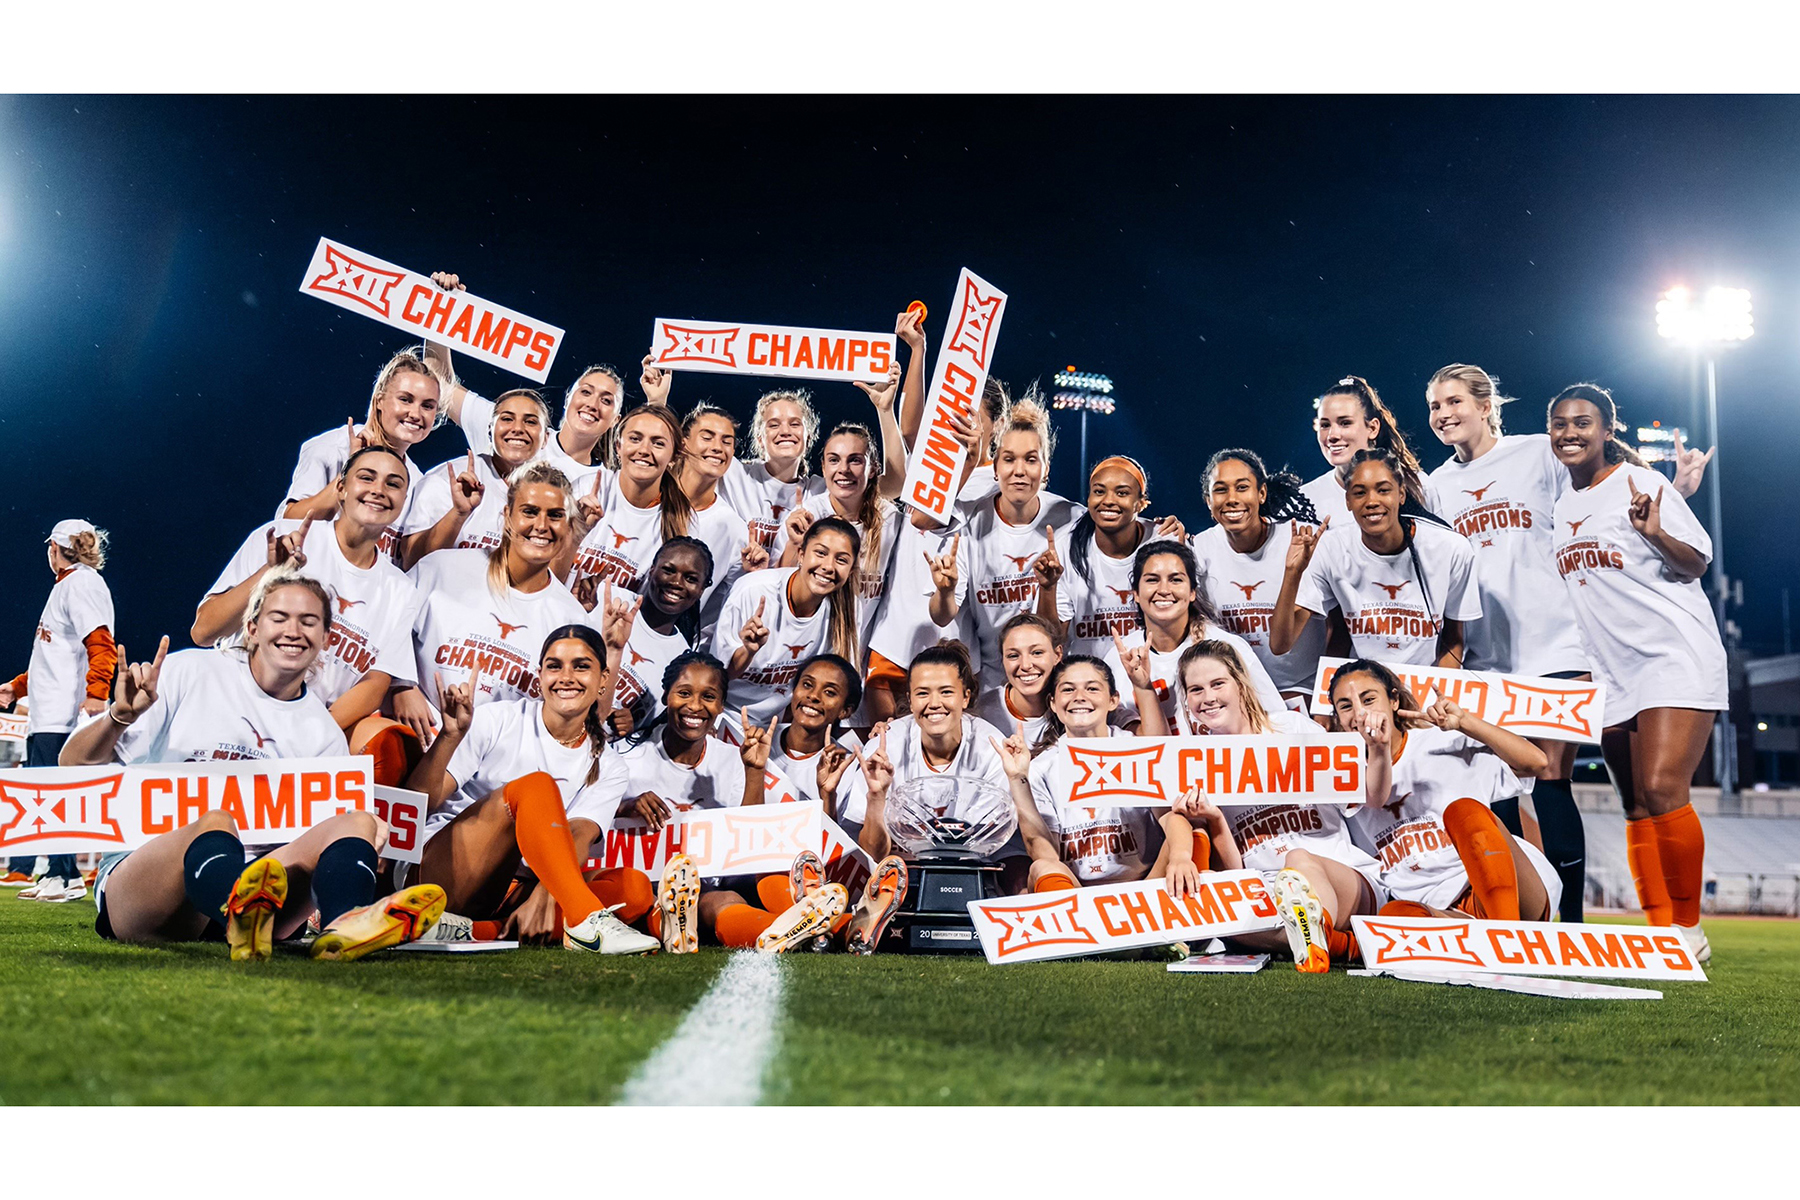 Texas soccer team holds up Big 12 champs signs in group photo